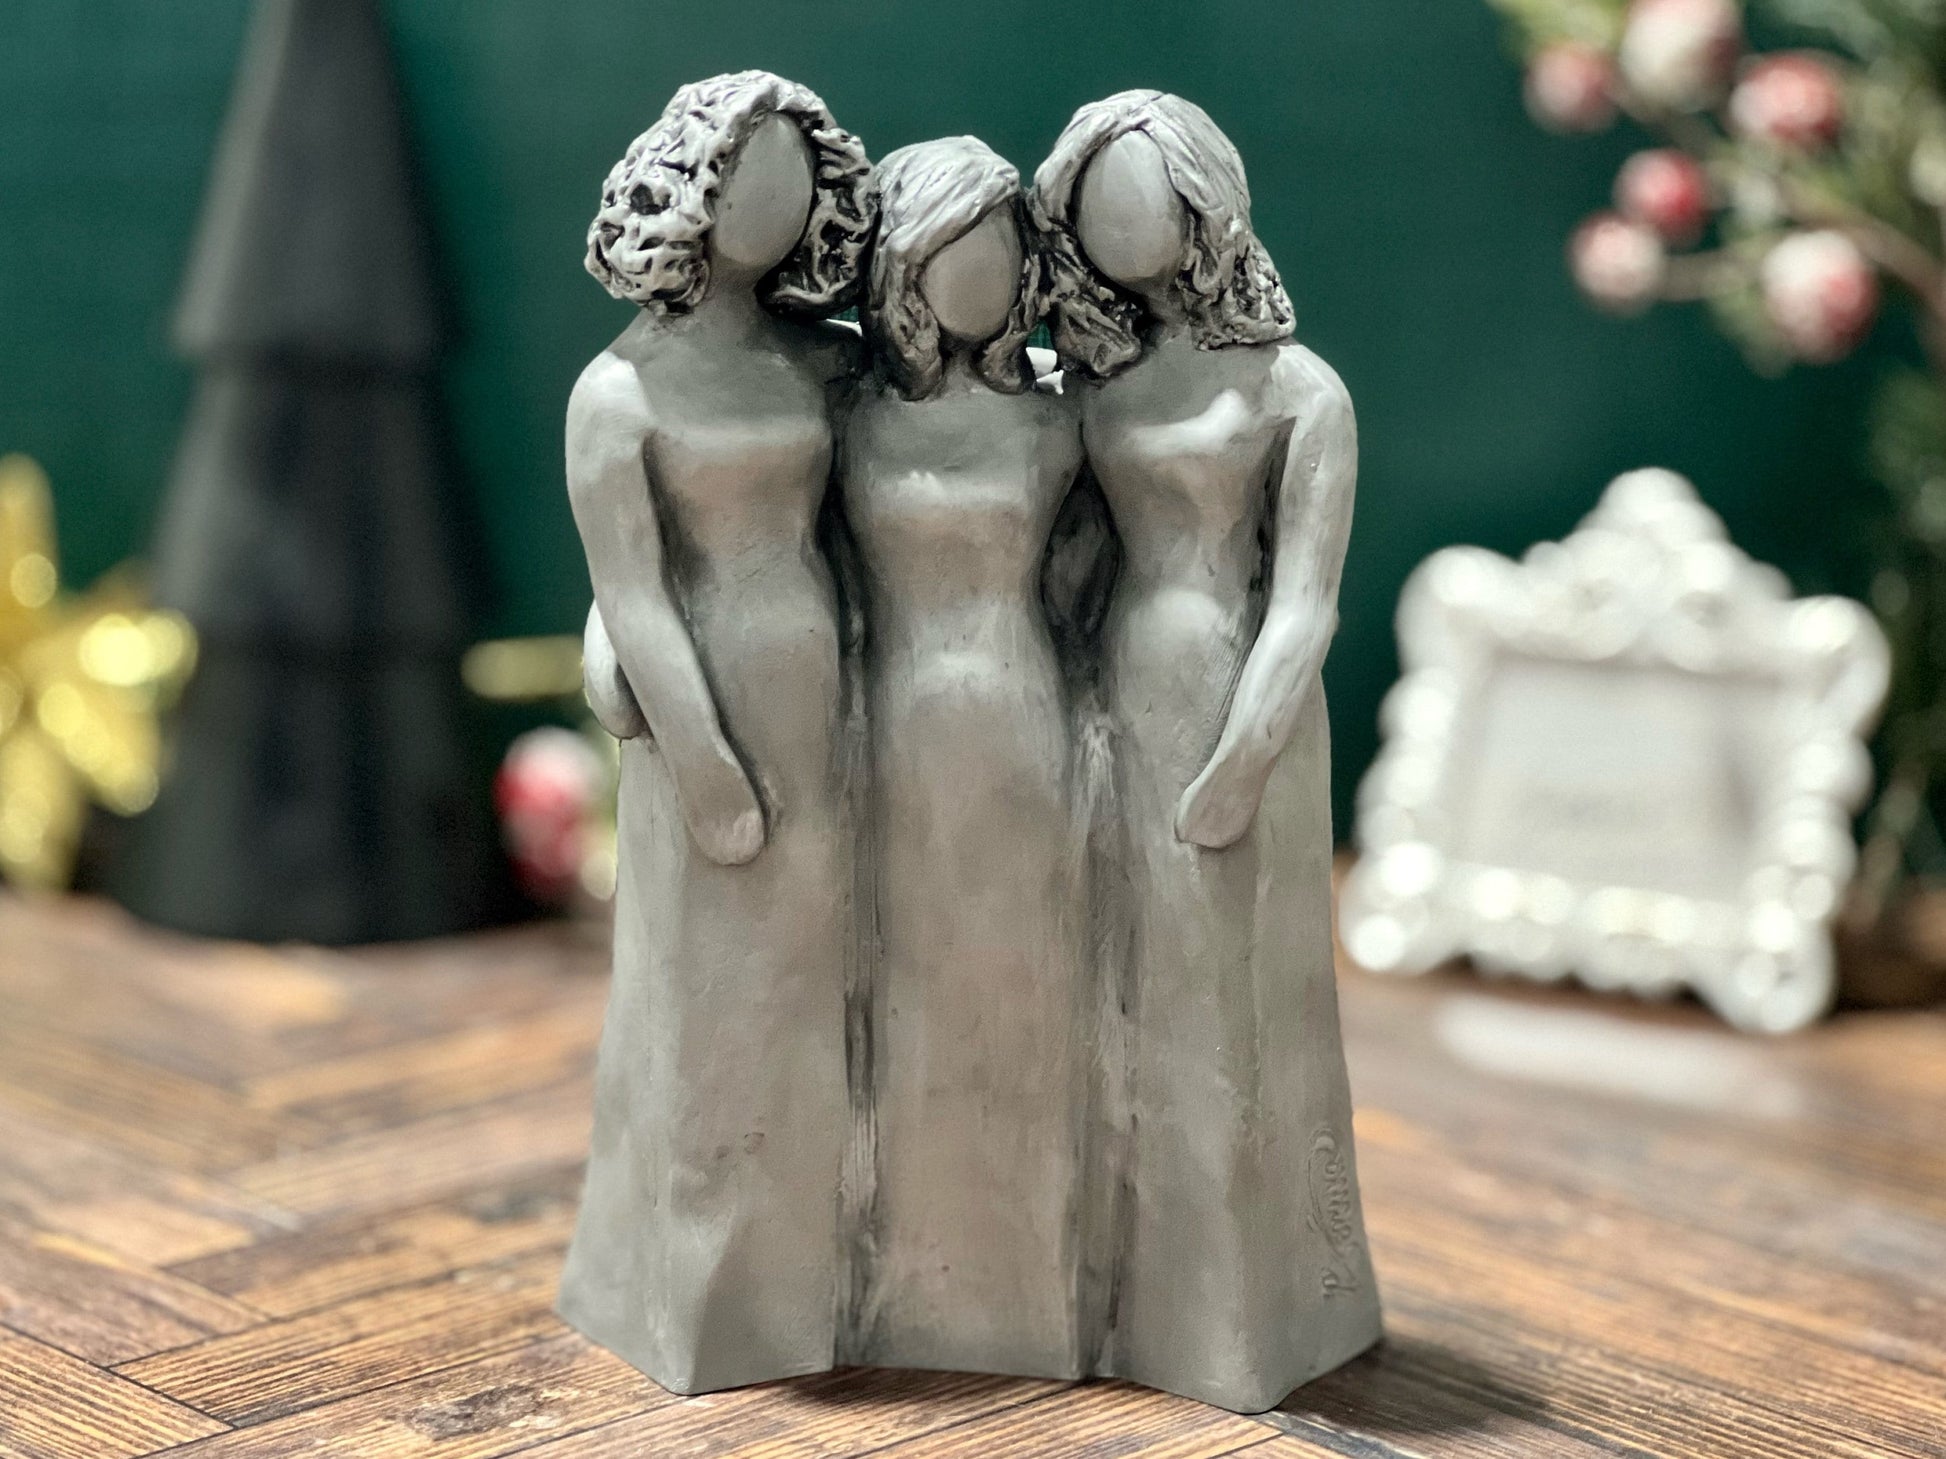 Generations of Love, A Sculpture for Mothers and Daughters, Grandmothers and Granddaughters, Sisters and Best Friends